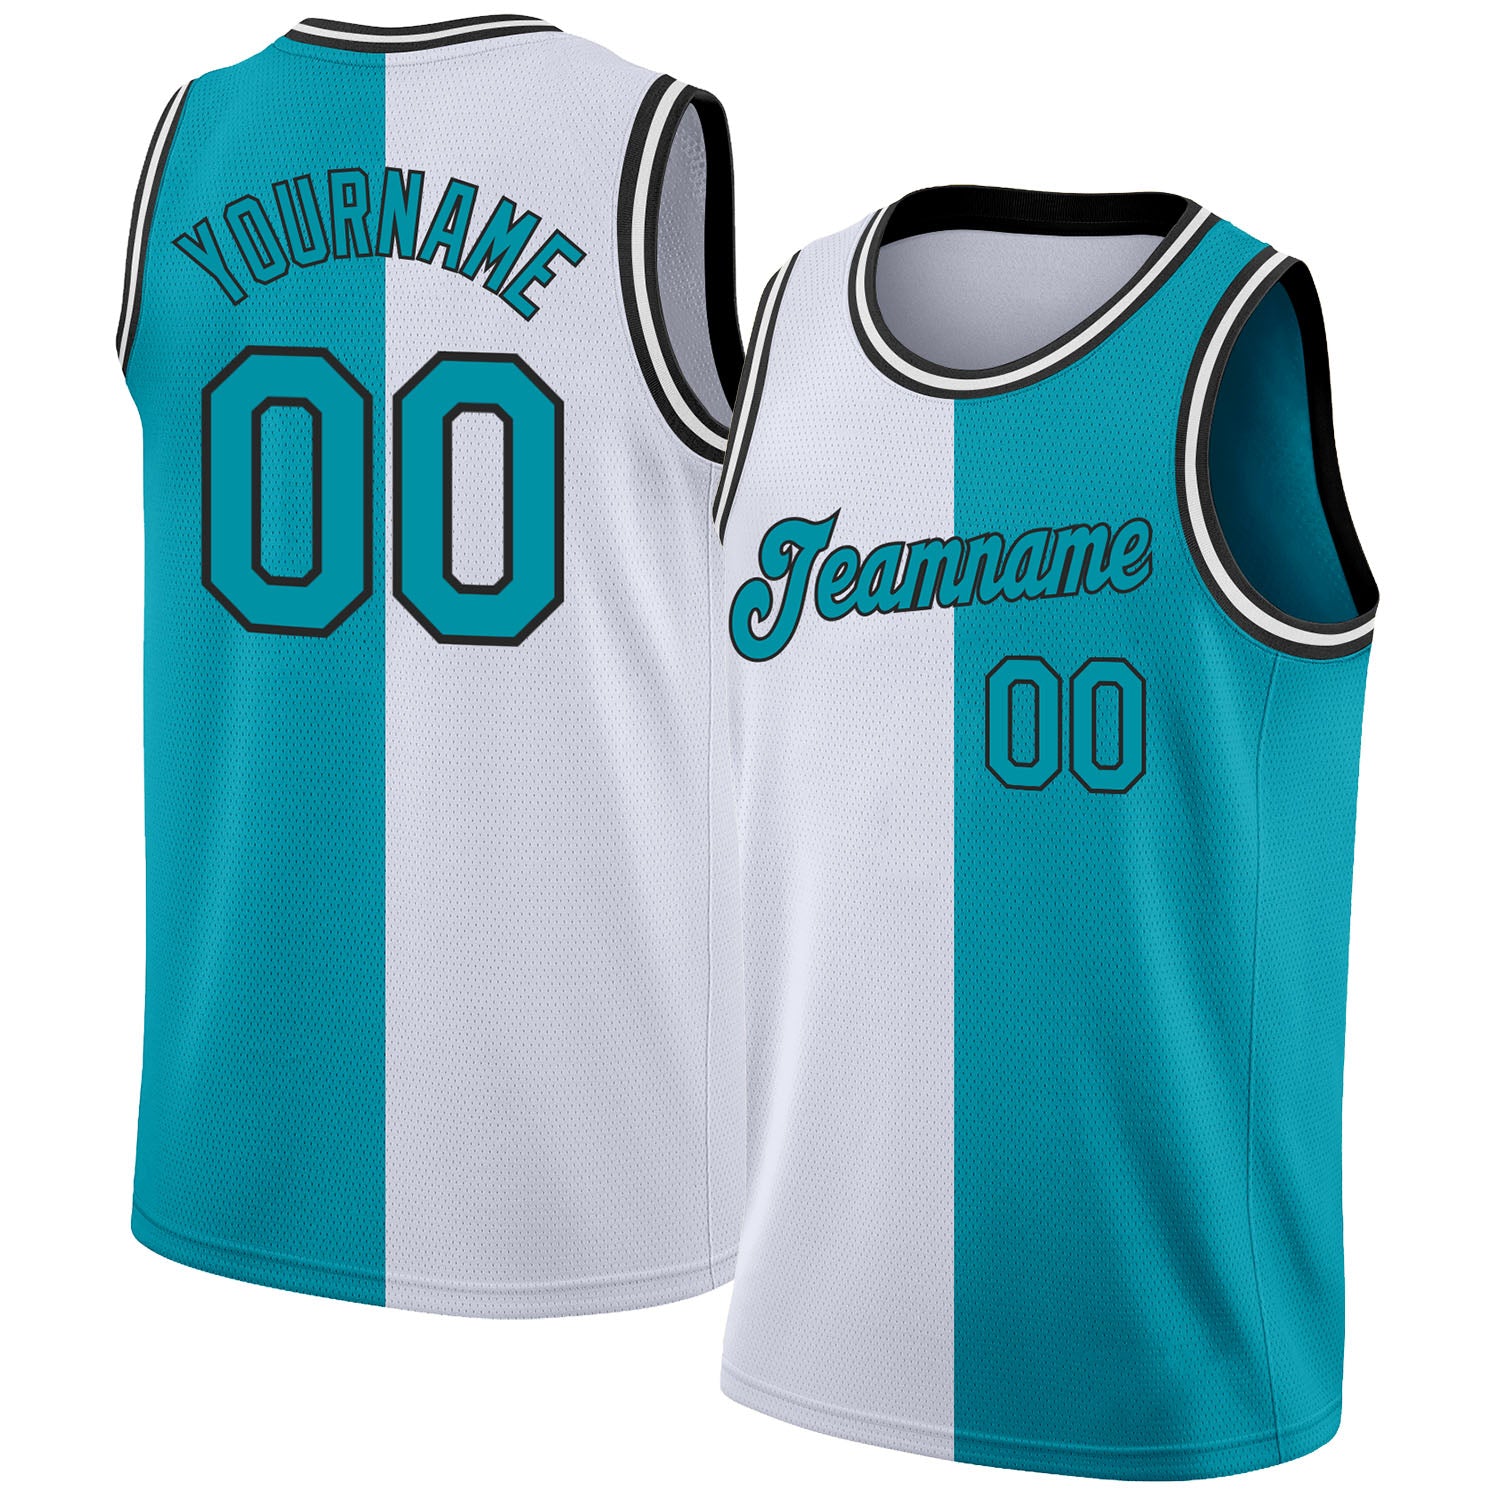 Cheap Custom Black Pink-Teal Authentic Throwback Basketball Jersey Free  Shipping – CustomJerseysPro